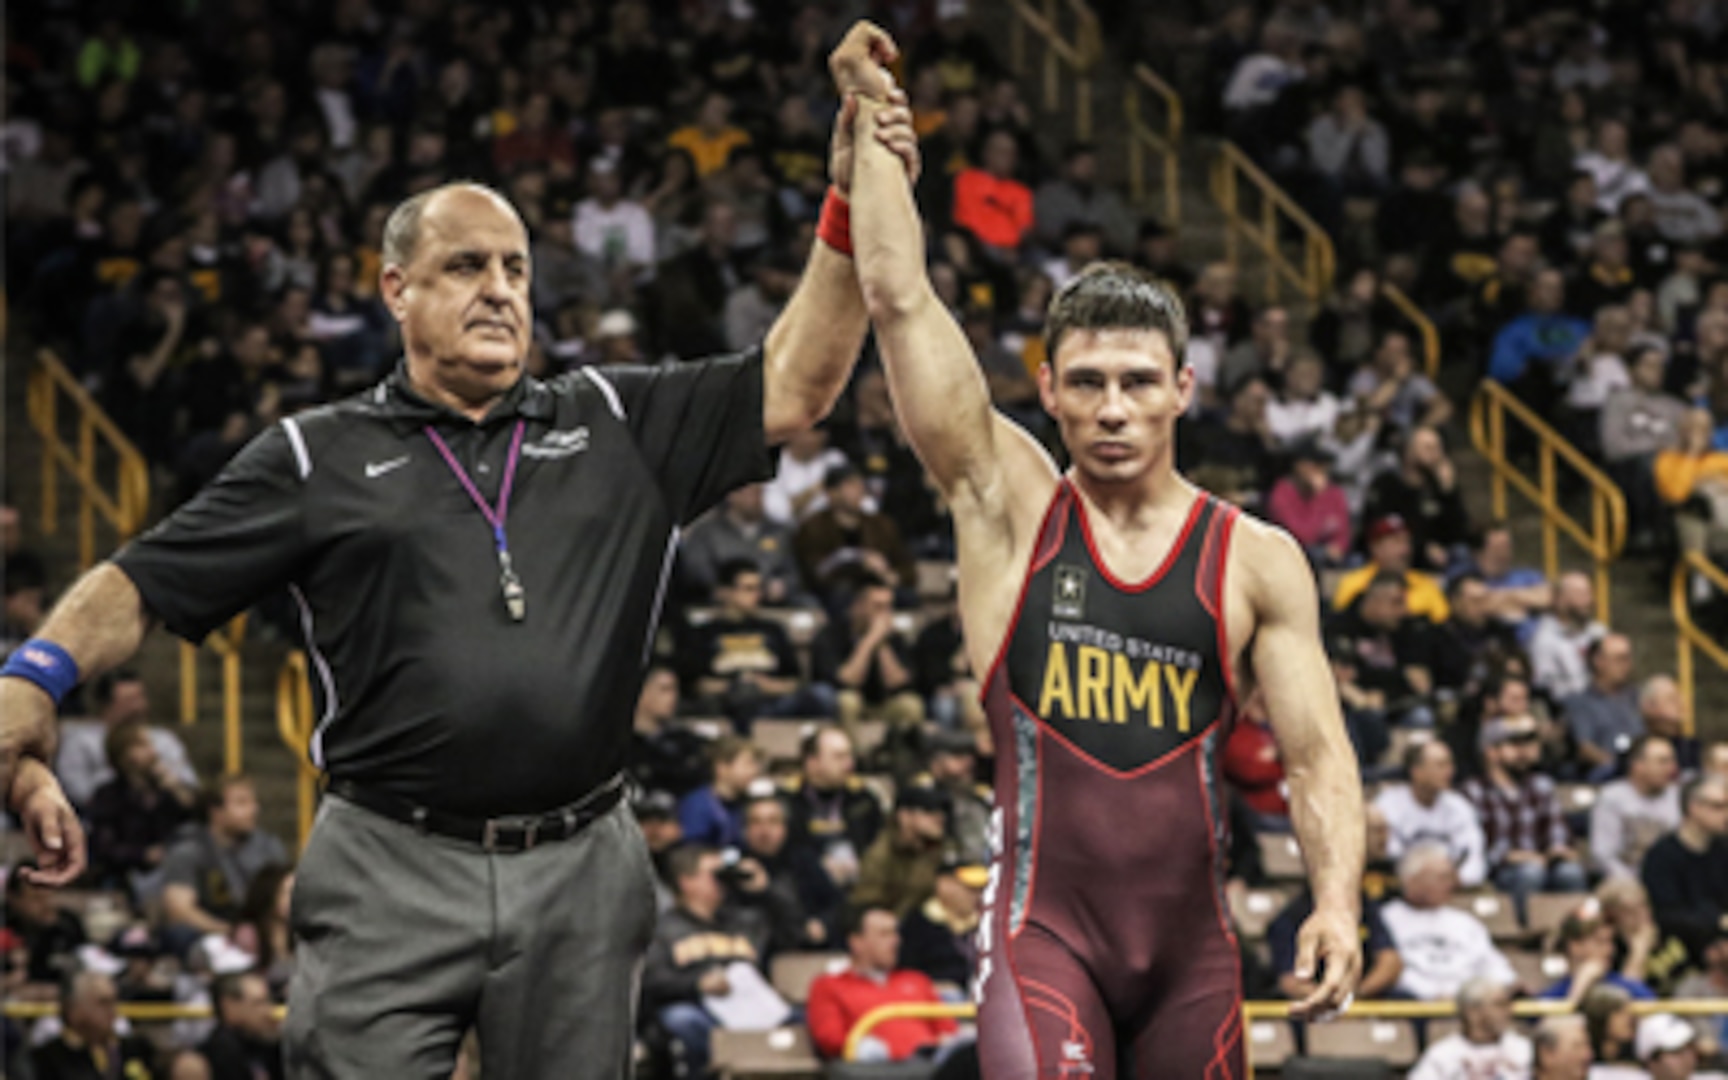 Ildar Hafizov of the U.S. Army, shown at the 2016 U.S. Olympic Team Trials, is one of the stars on the Army roster for the 2017 Armed Forces Championships. Photo by John Sachs, Tech-Fall.com